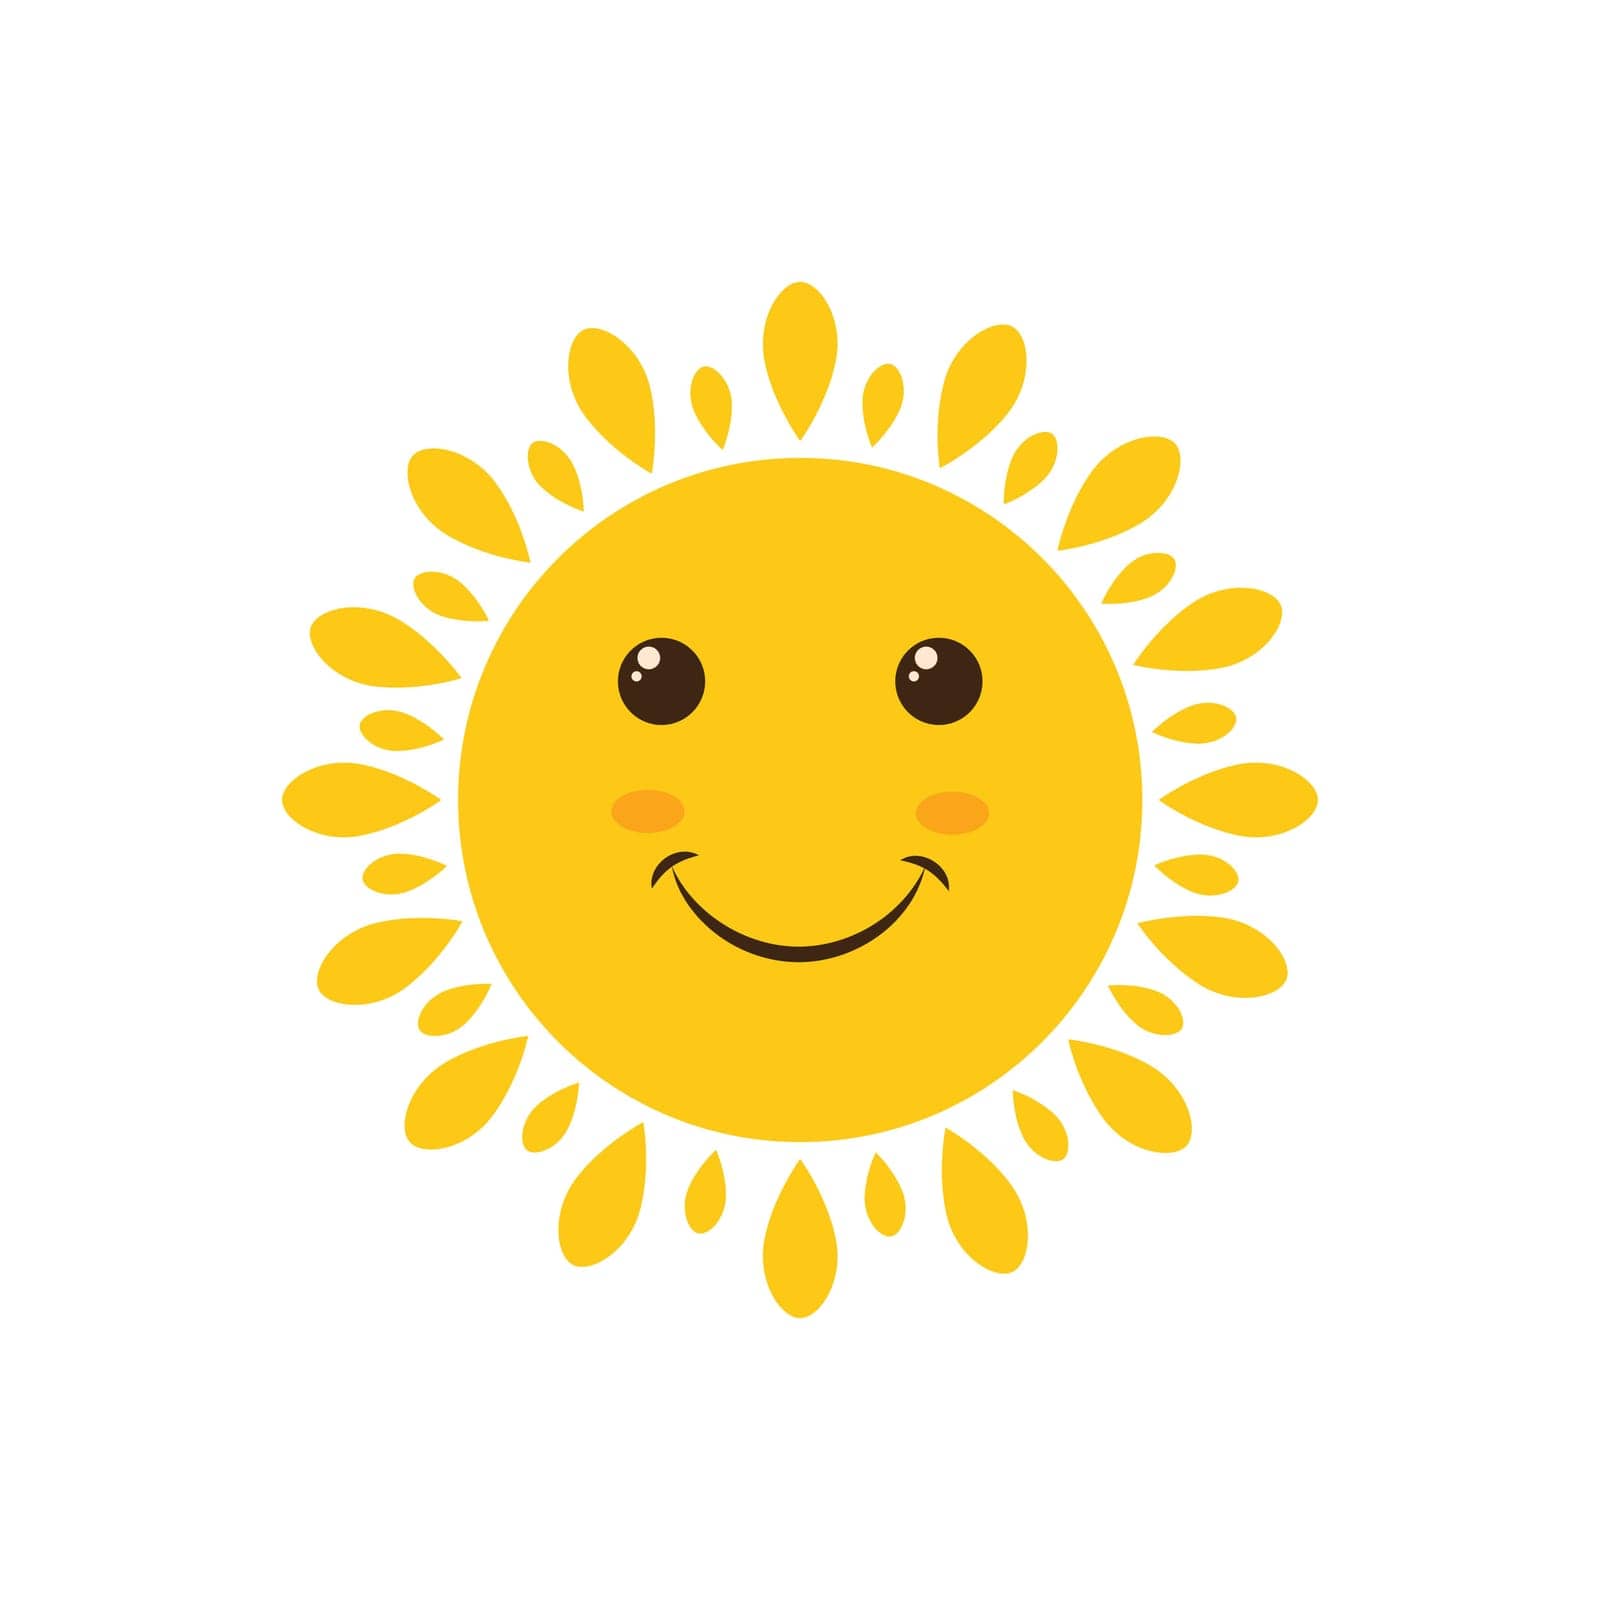 The sun. Vector positive illustration of a yellow smiling sun with joyful emotions, with beautiful rays. Icon. Cartoon children s vector image isolated on a white background